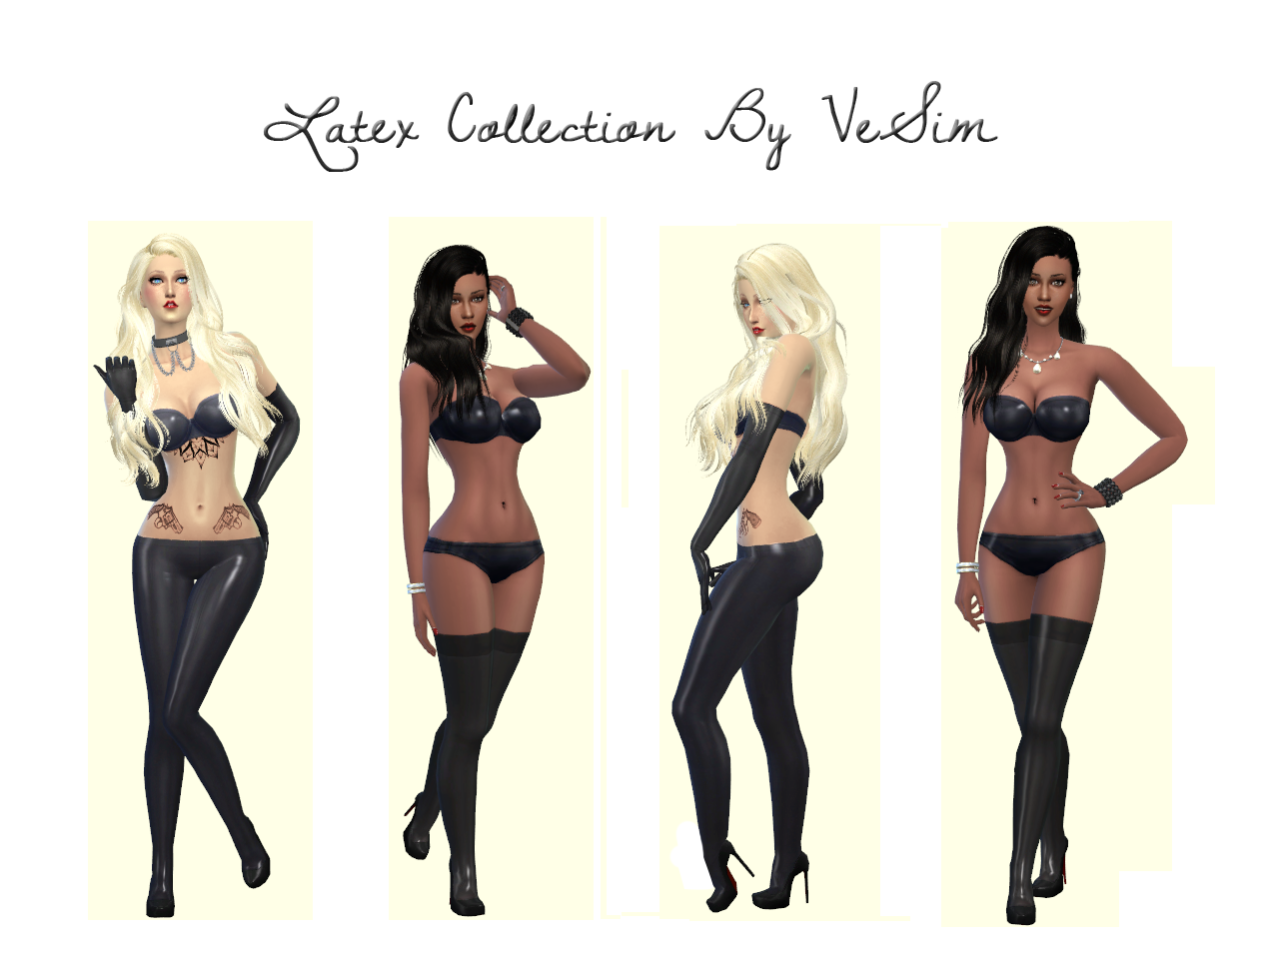 Latex Collection• Before download the file, read the terms of use.
• How to install: extract the files and copy the *.package file and paste in
Electronic Arts\The Sims 4\Mods.
• Wait 5 sec and skip the ad.
• Made with Sims 4 Studio.
• Includes: 3...